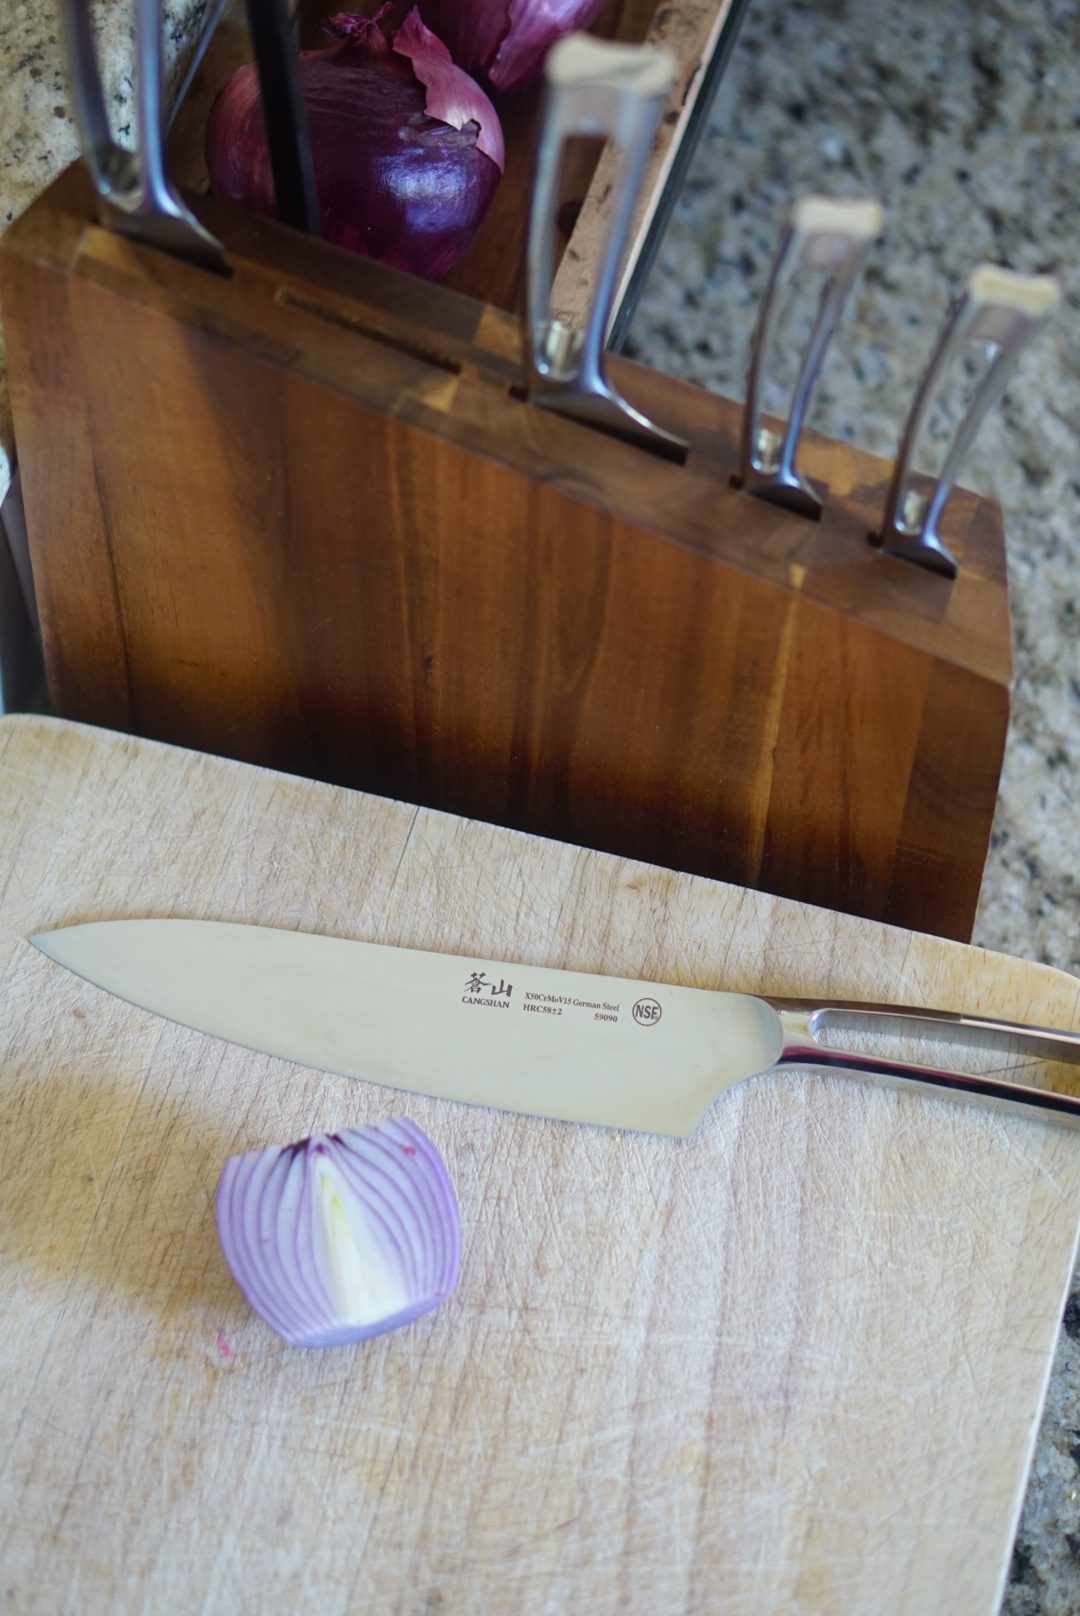 Kitchen Essentials - Best Knives Knife Block Cangshan Oprah's Favorite Things - Shop For no eBay - ebay home goods via Misty Nelson, lifestyle blogger ad parenting influencer mom at frostedblog @frostedevents